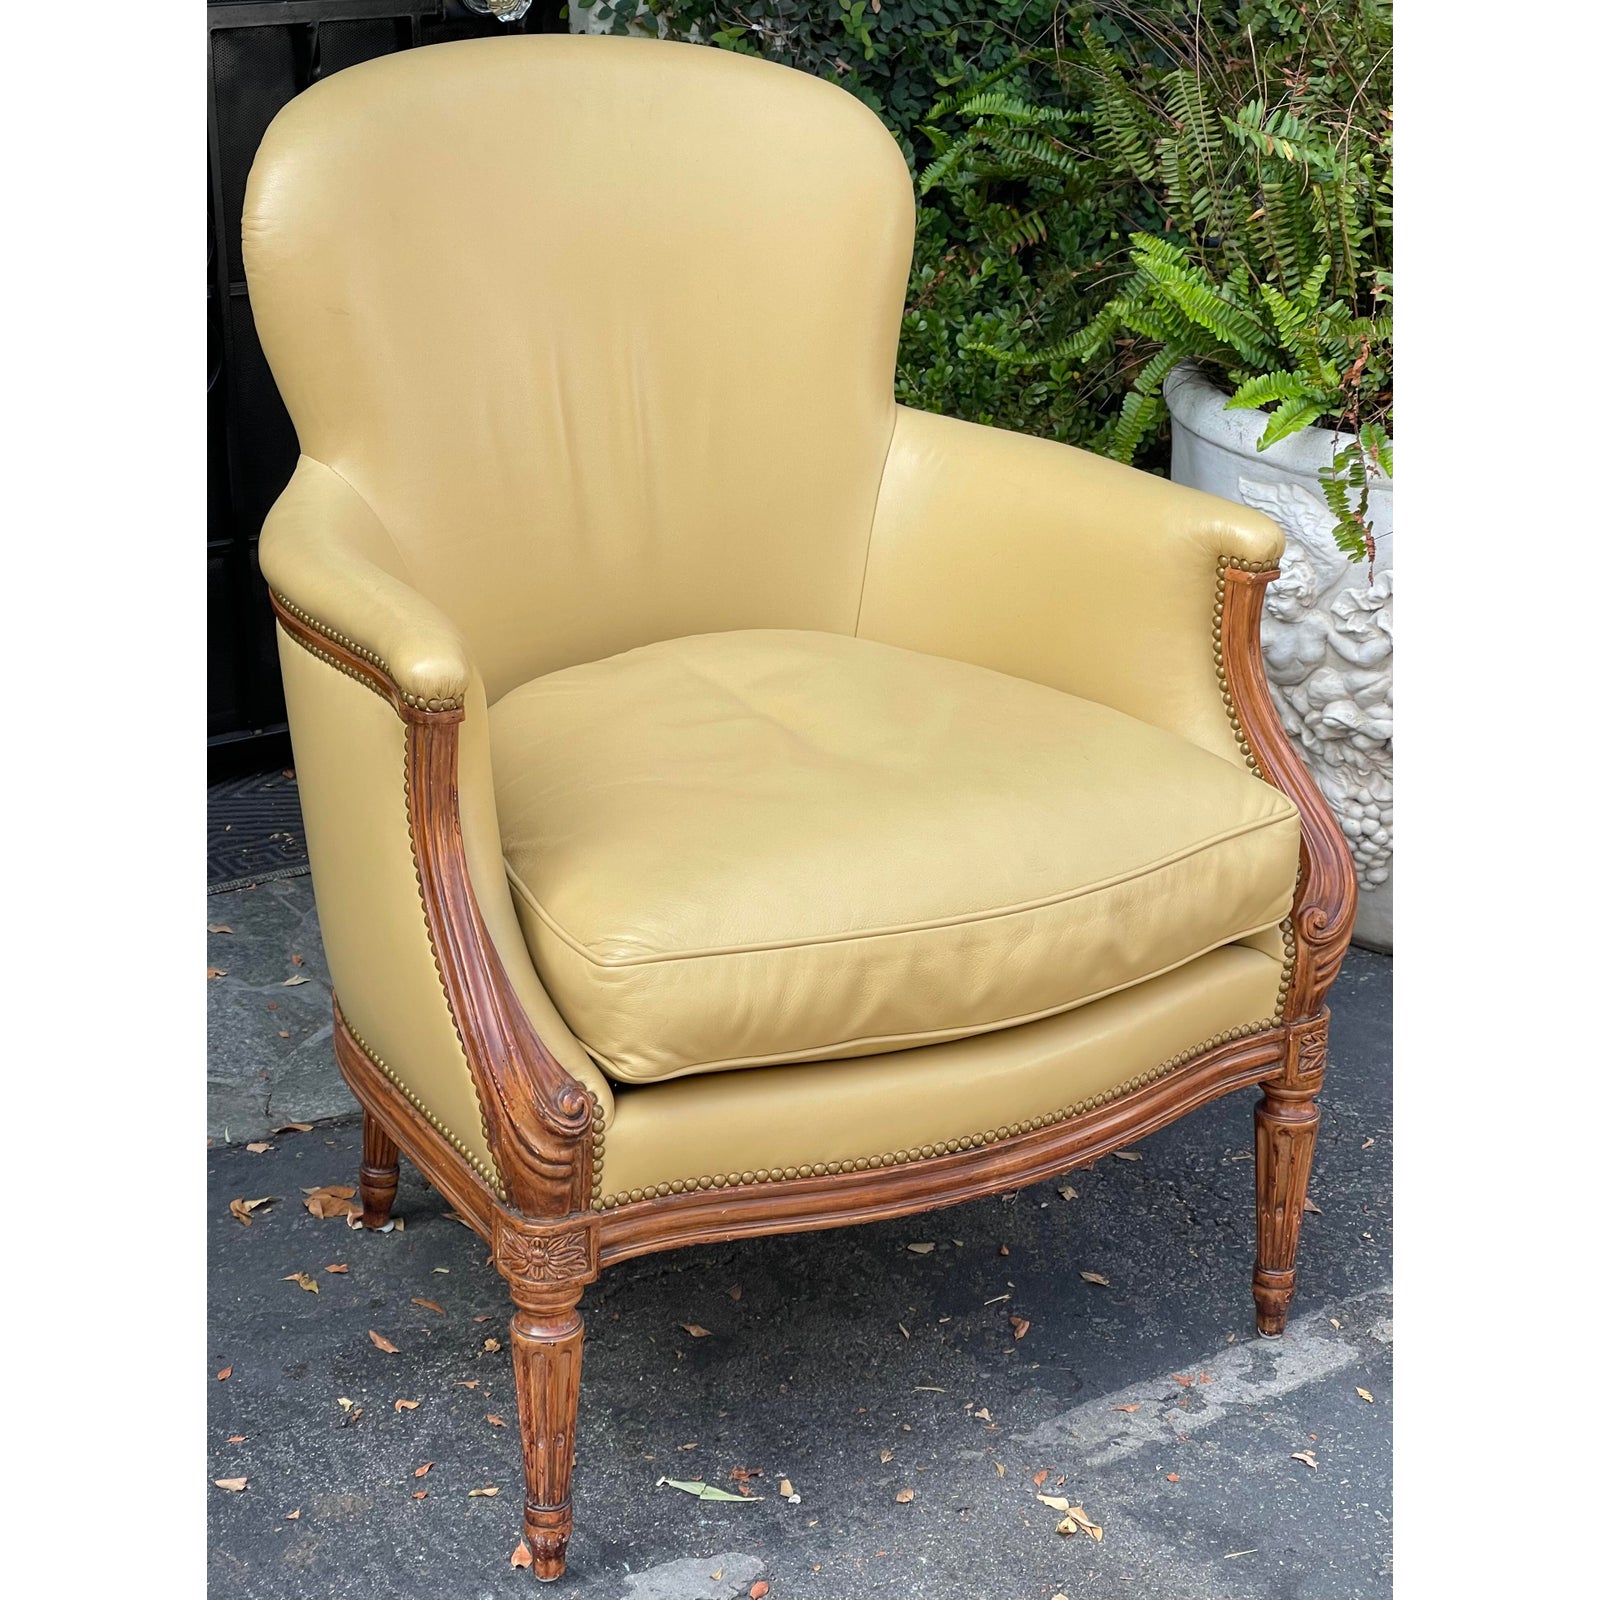 louis-xv-style-dennis-and-leen-leather-bergere-arm-chair-7977